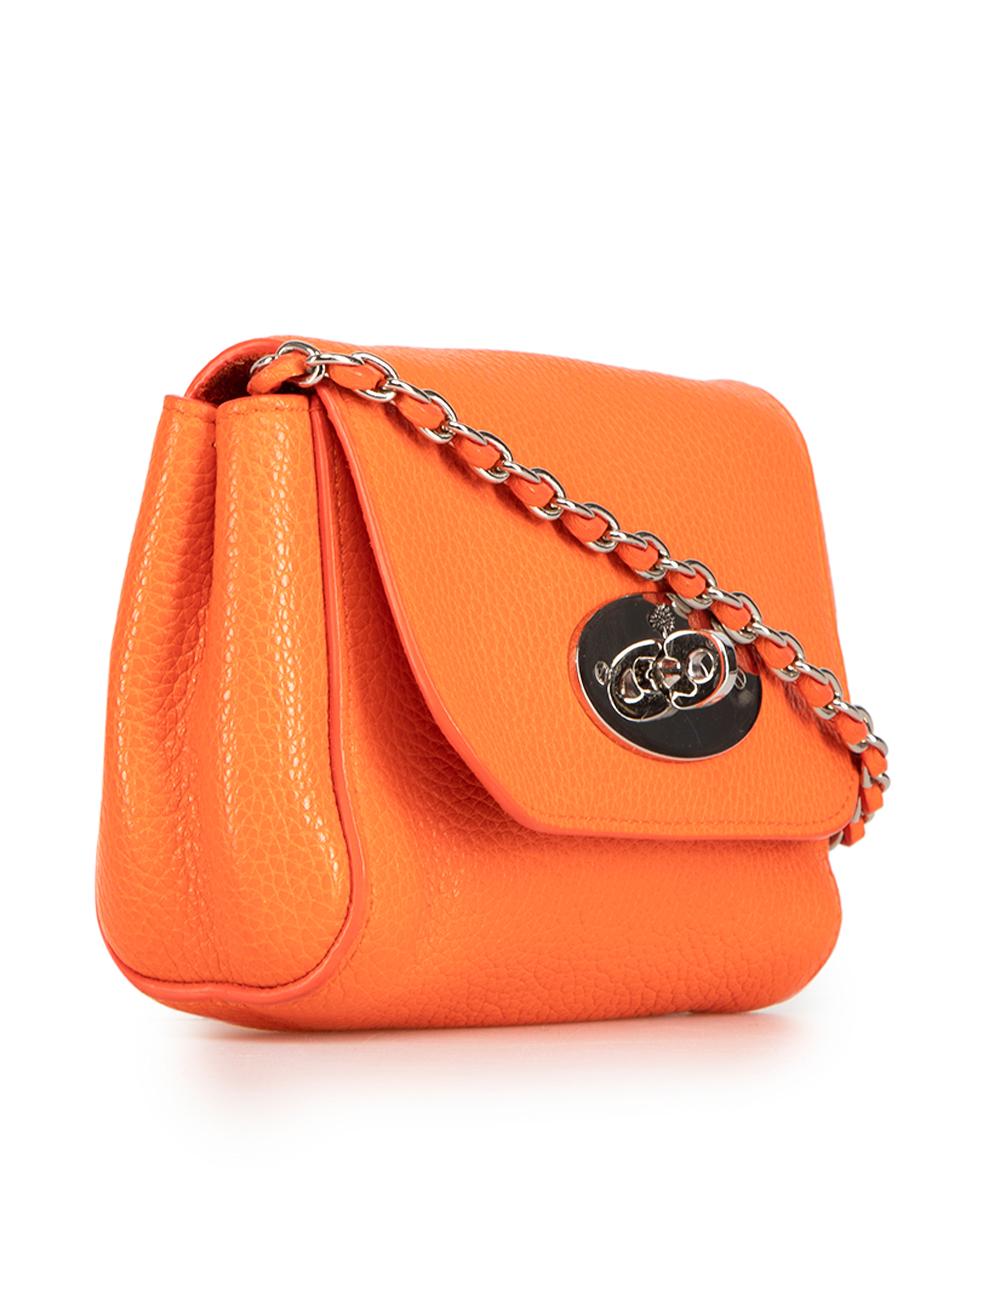 CONDITION is Very good. Minimal wear to bag is evident. Minimal wear to the hardware with light scratching to the metal on this used Mulberry designer resale item.
 
Details
Lily
Orange
Leather
Mini crossbody bag
Silver tone hardware
Chain and